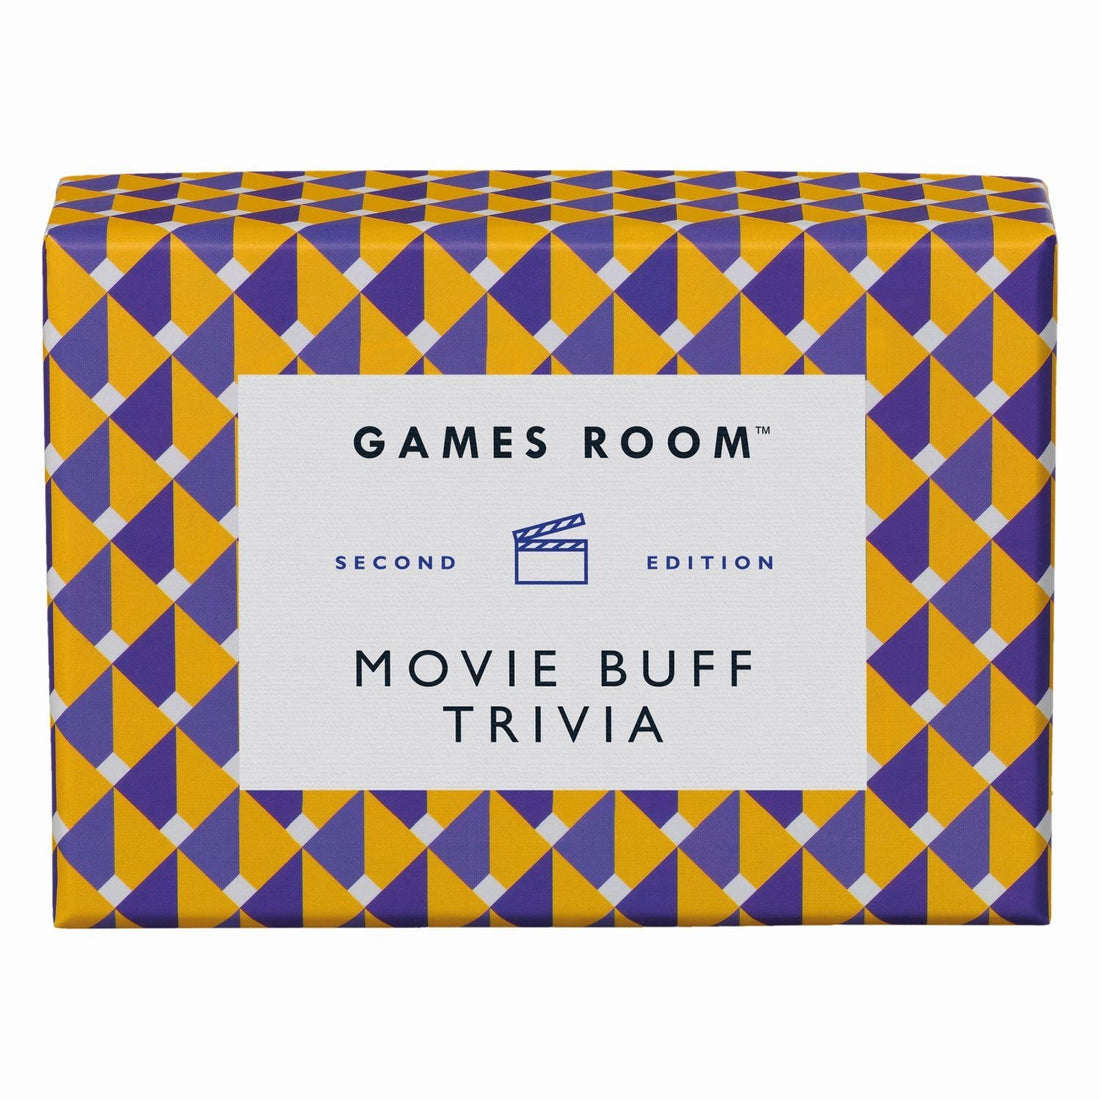 A colorful box of &quot;Movie Buff Trivia&quot; second edition by Chronicle Books.